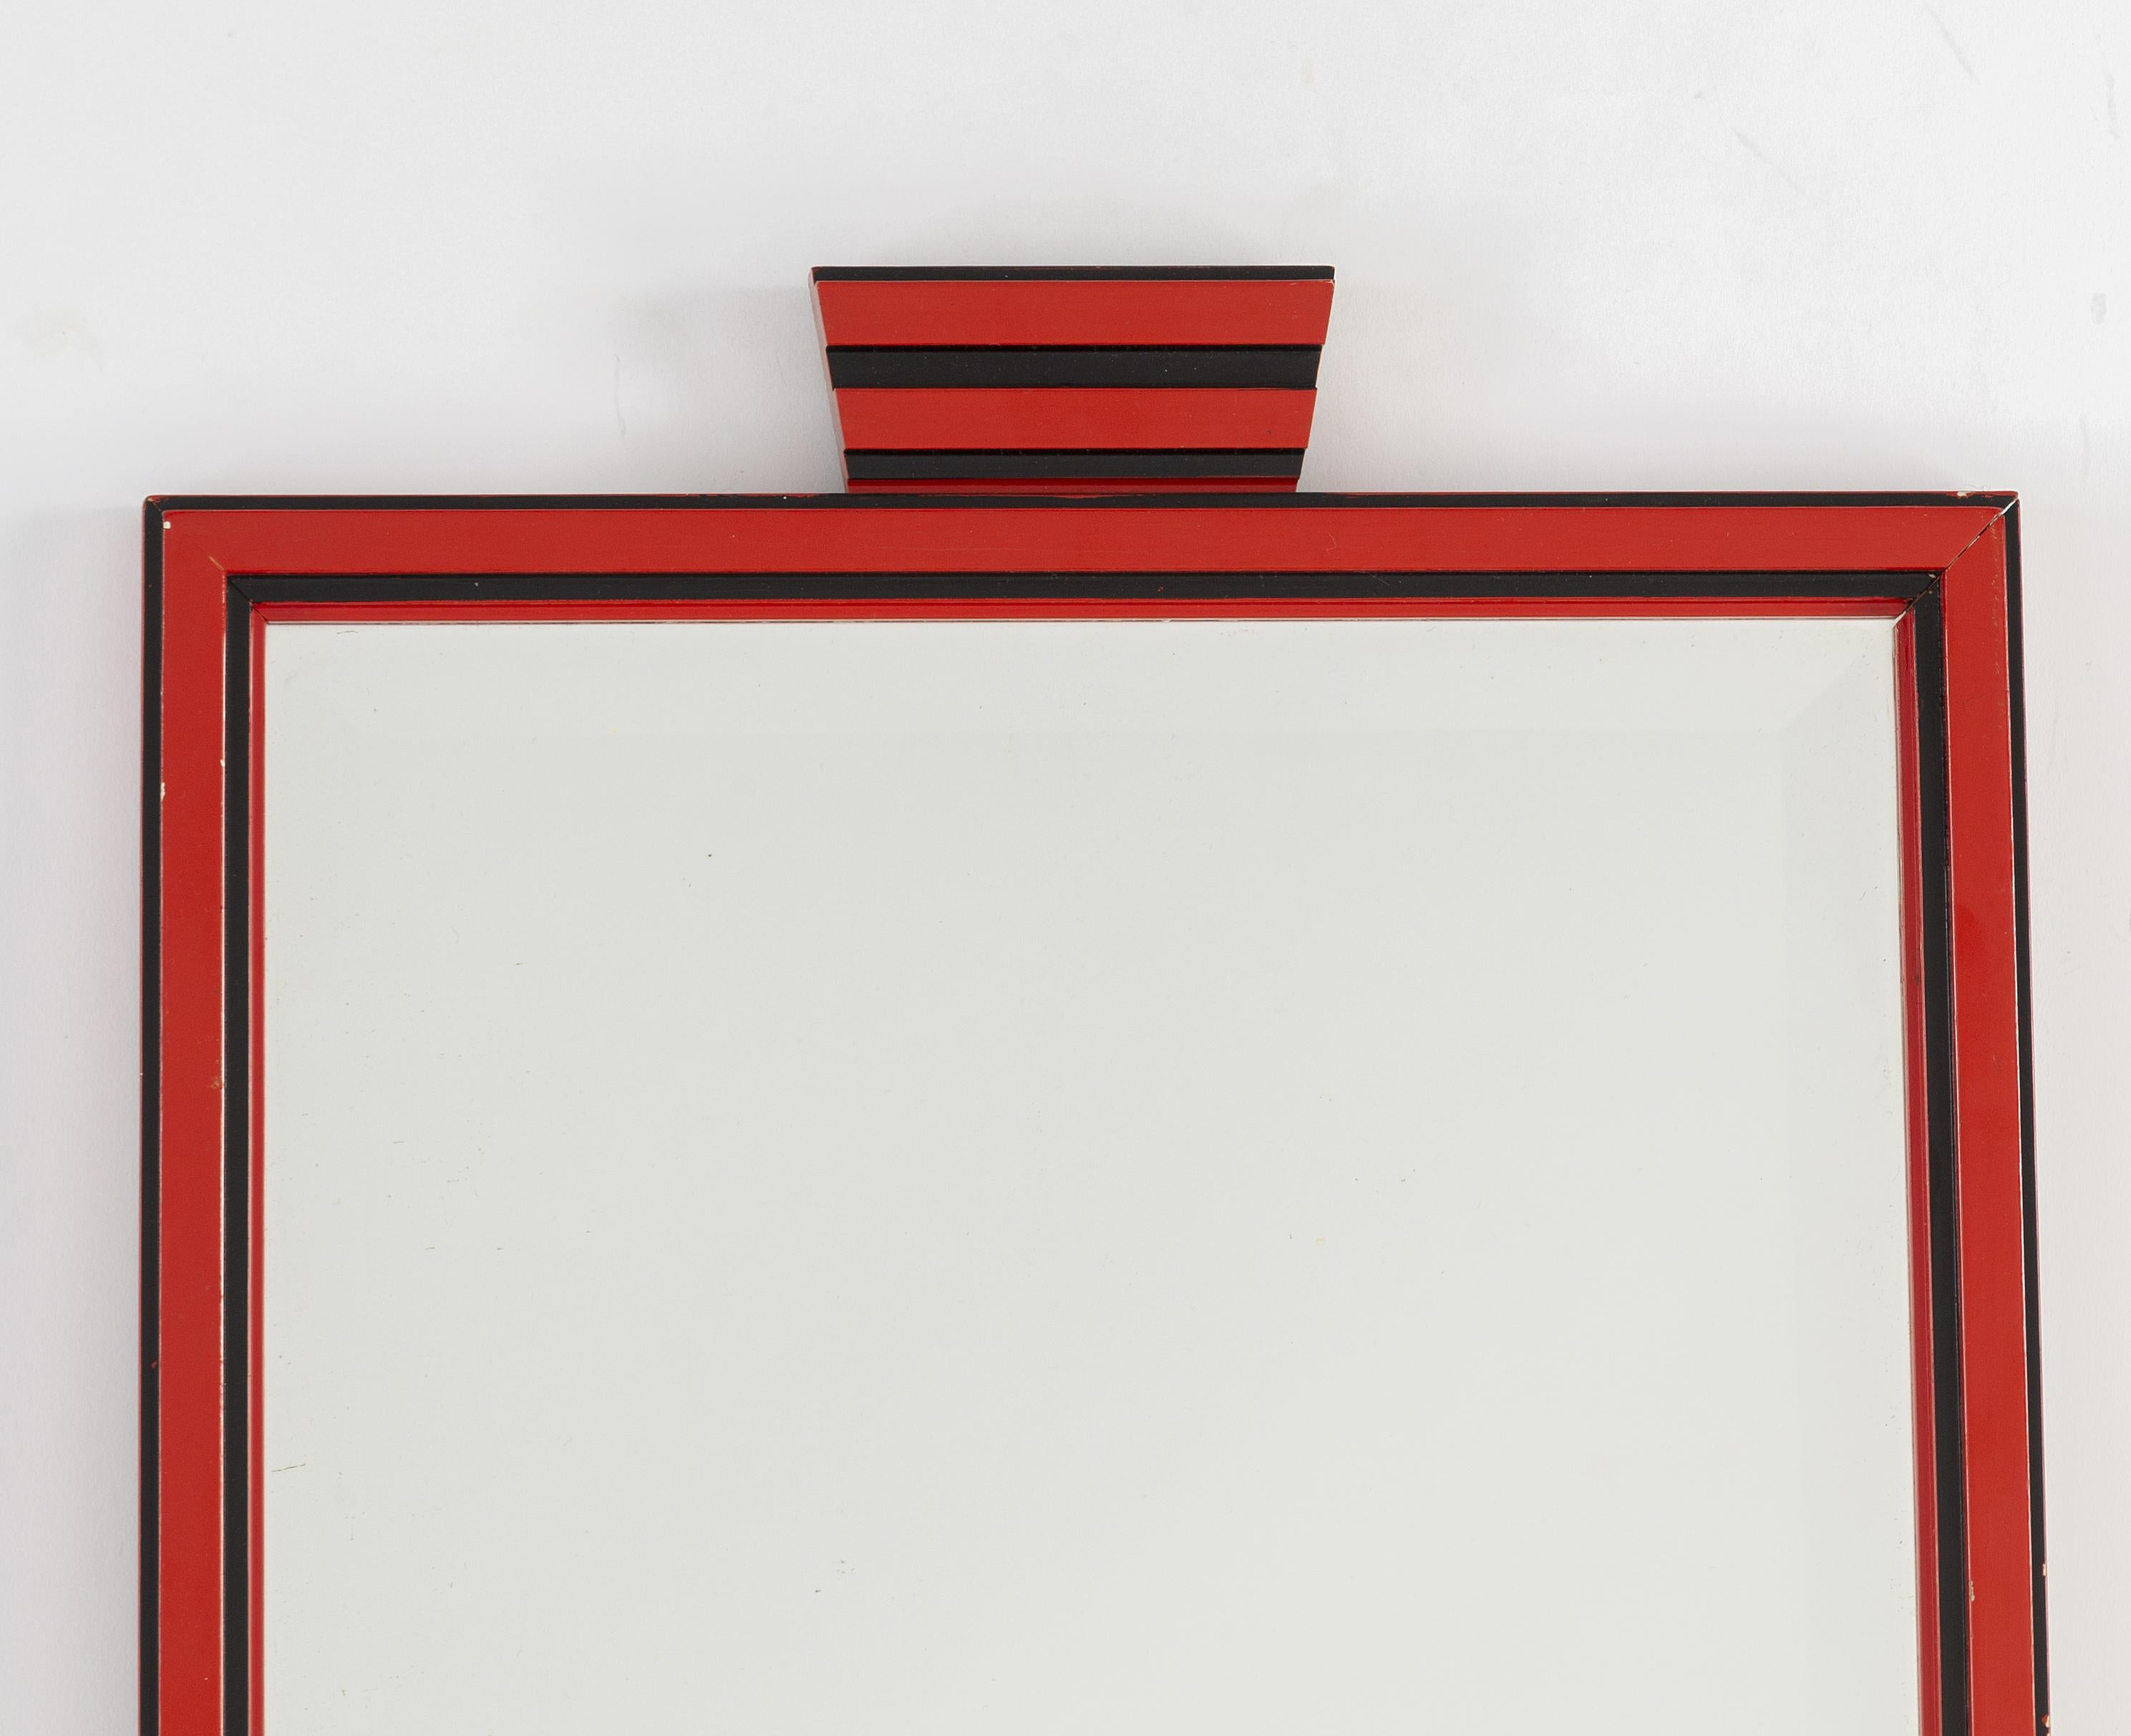 1920s Art Deco mirror, Swedish. Red, painted wood frame

Wonderful mirror- feel in love when spotted on our latest trip to Sweden.